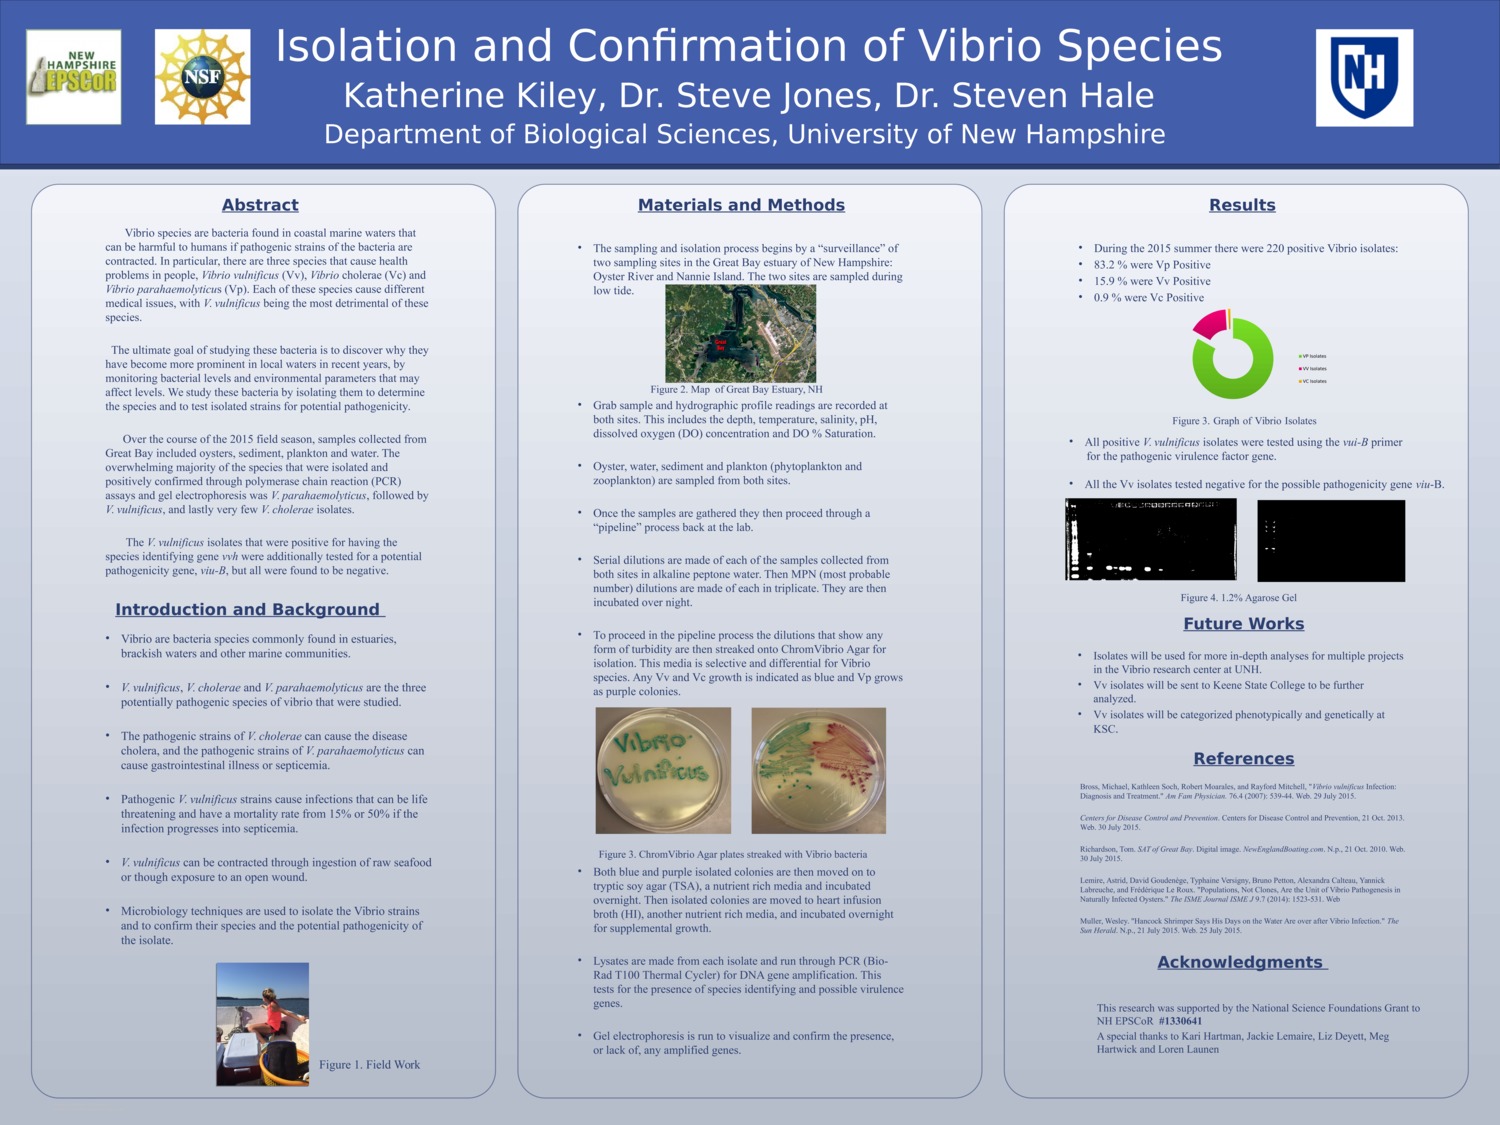 Isolation And Confirmation Of Vibrio Speciessolation And Confirmation Of Vibrio Species by kakk1202